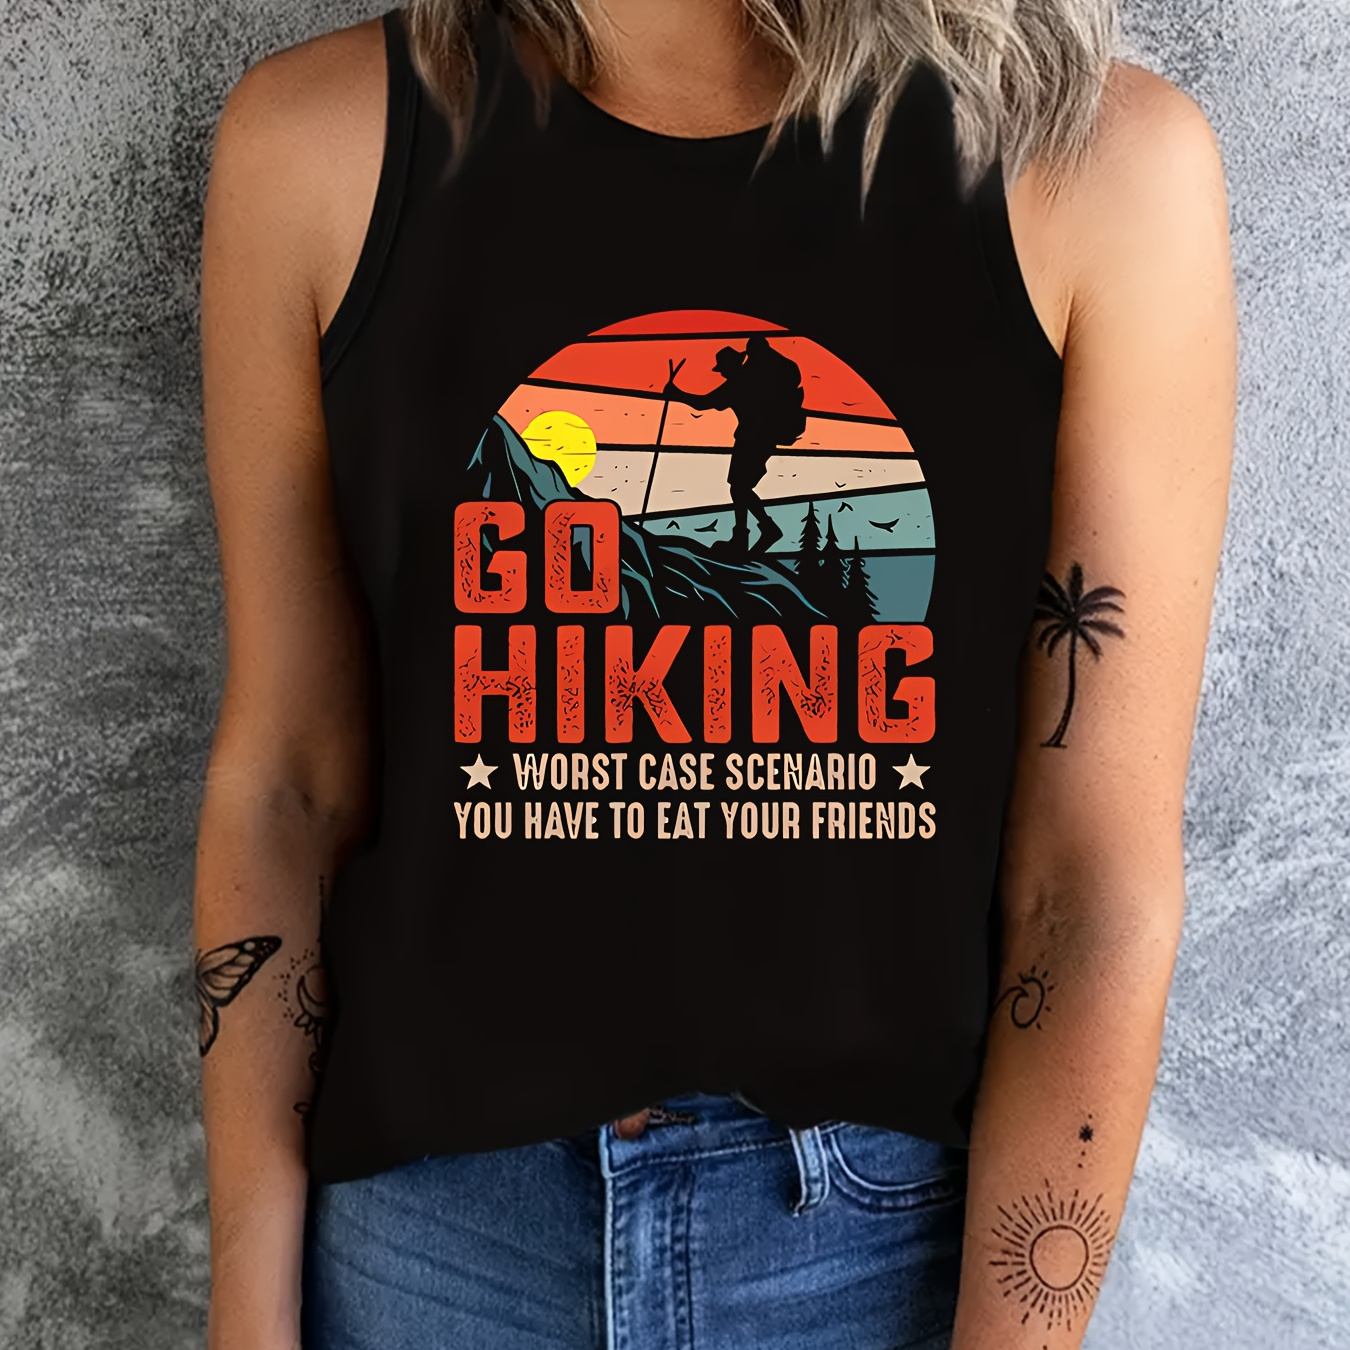 

Women's Sleeveless Black Tank Top With Go Hiking Graphic, Casual Athletic Style, Breathable Sunset & Hiker Print, Comfortable Activewear Shirt